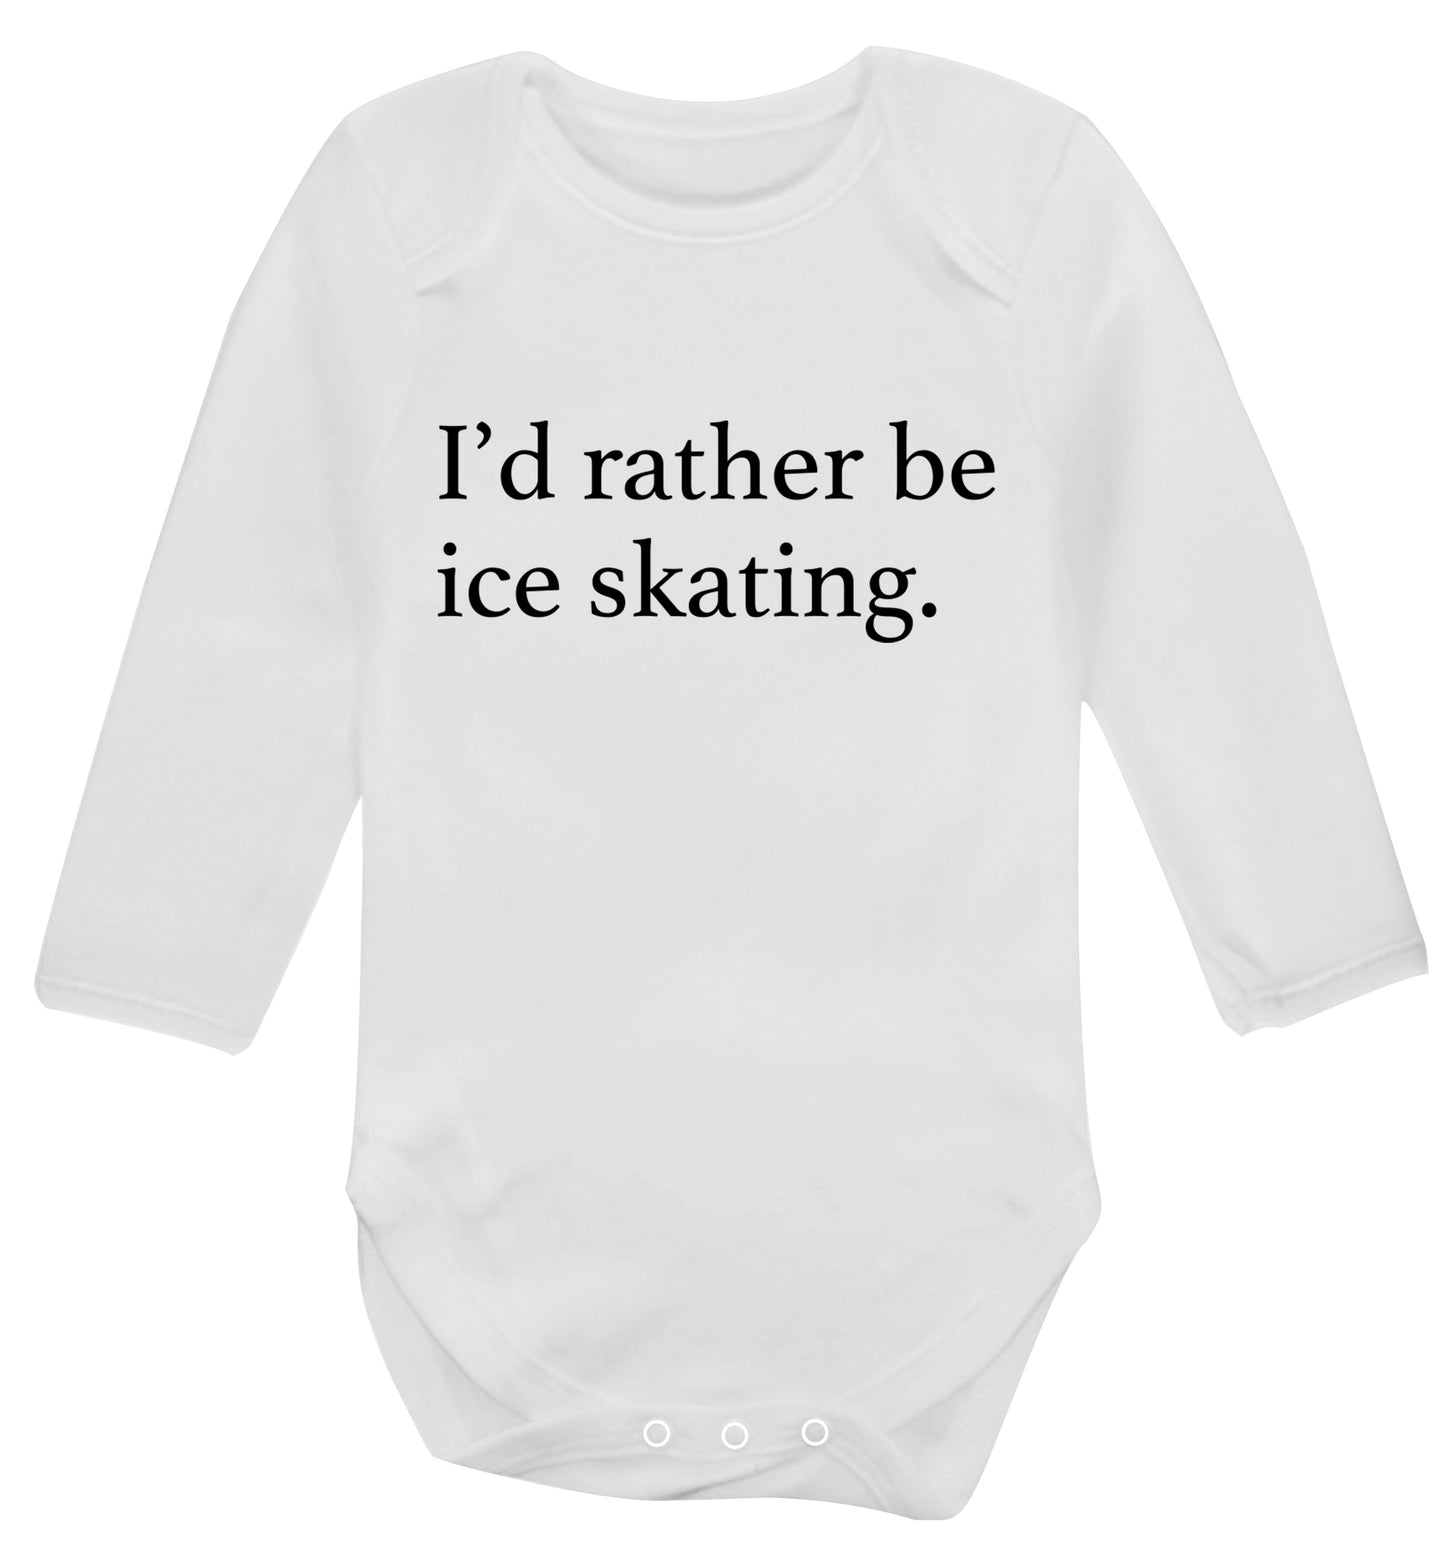 I'd rather be ice skating Baby Vest long sleeved white 6-12 months